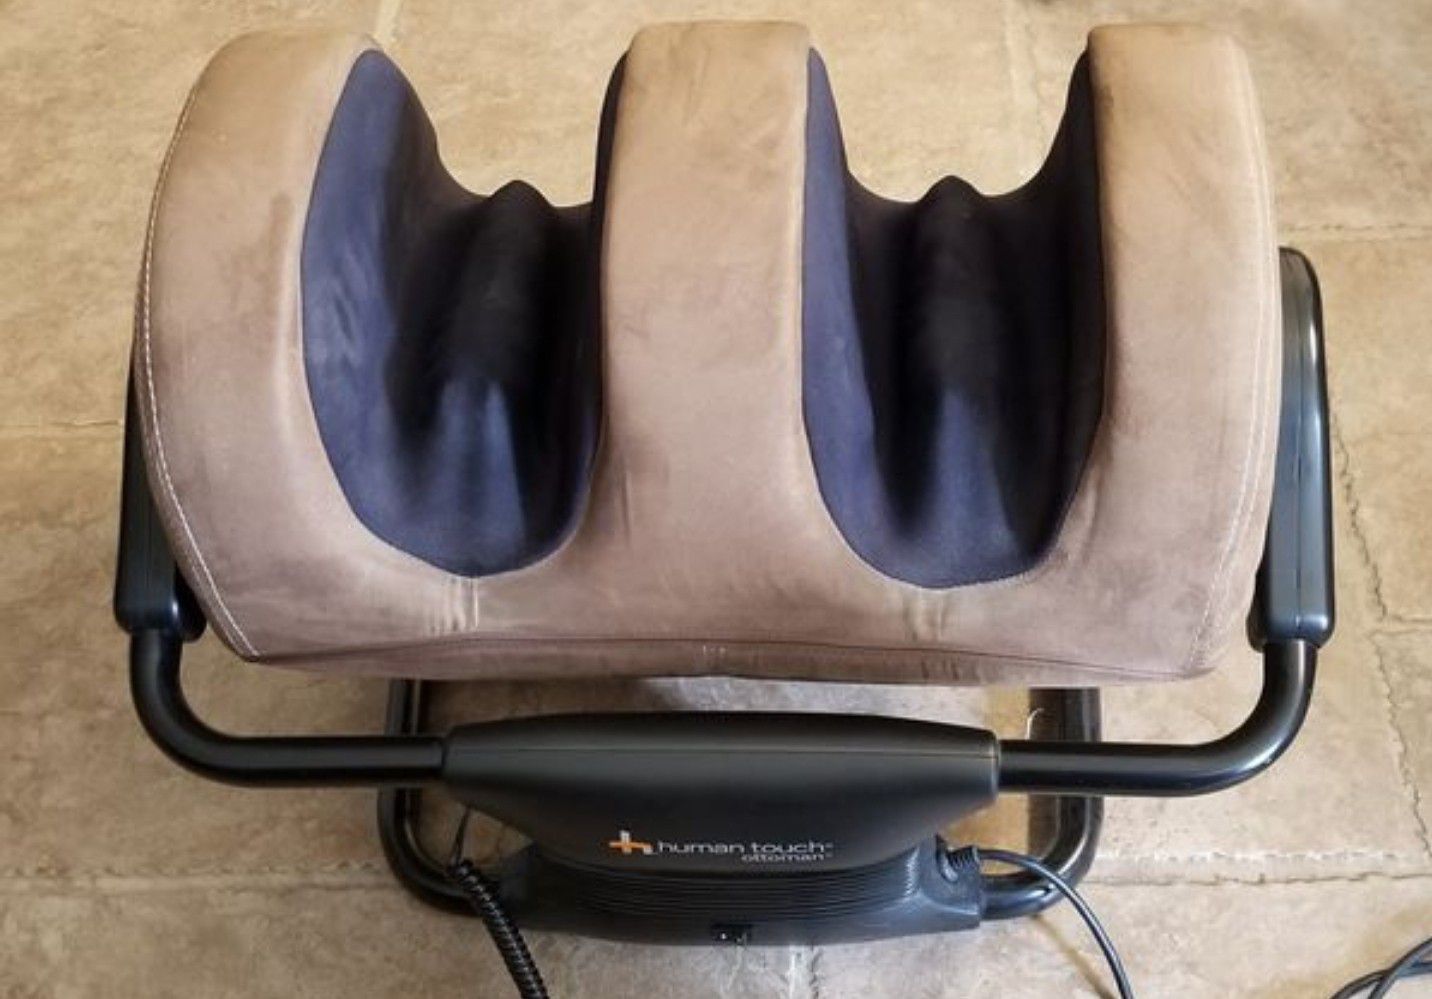 Human touch electronic foot and calve massager